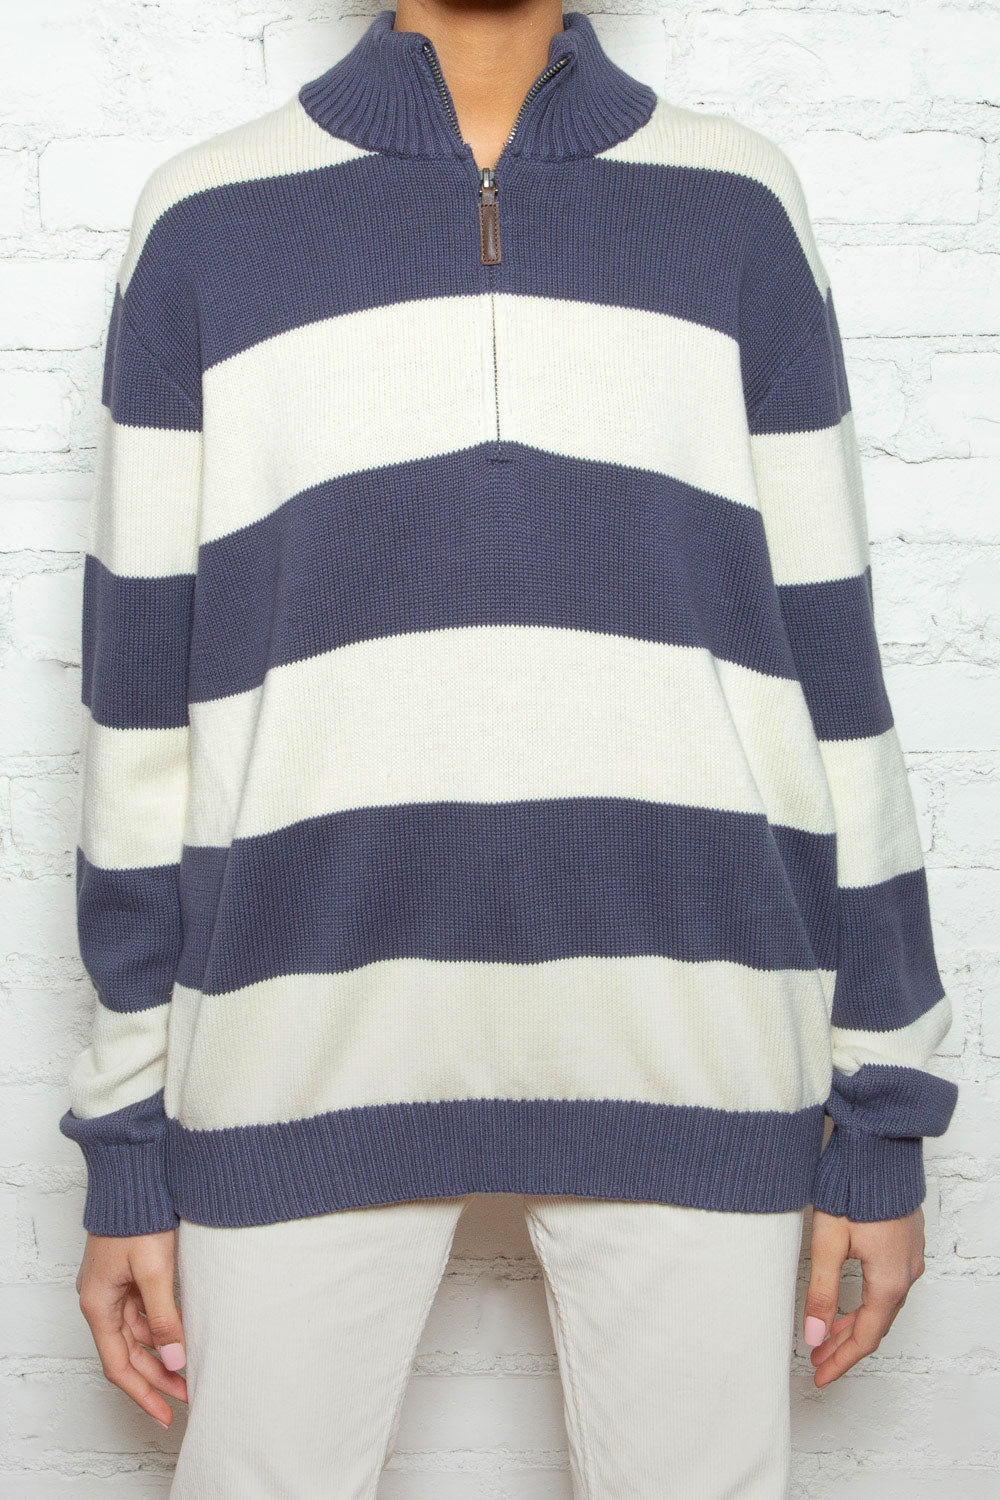 Ivory with Blue Stripes / Oversized Fit